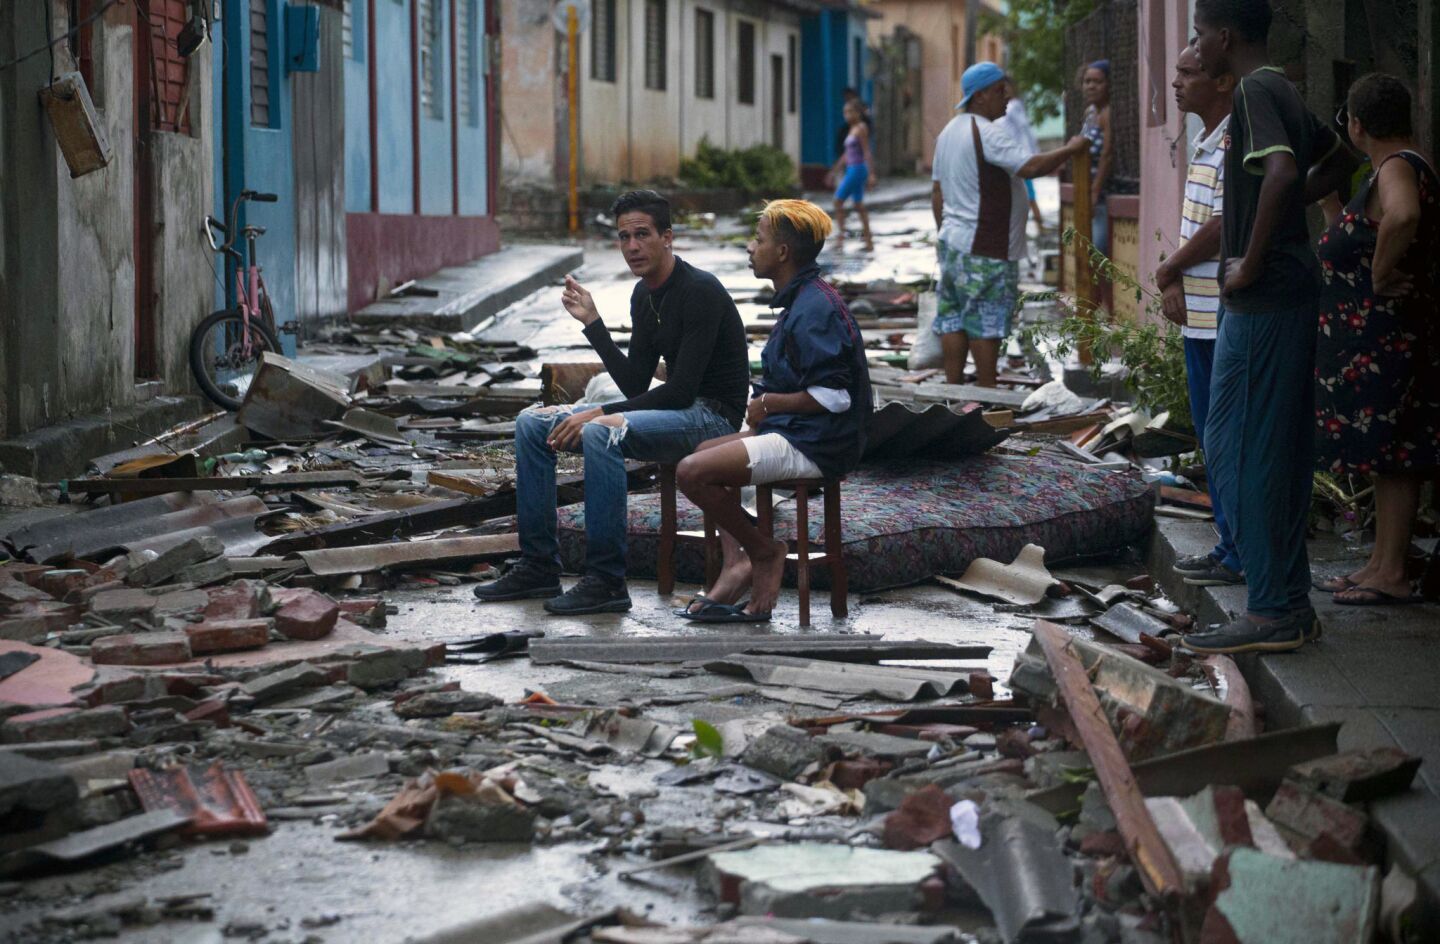 People sit amid debris left by Hurricane Matthew in Baracoa, Cuba. The hurricane rolled across the sparsely populated tip of Cuba overnight, destroying dozens of homes in Cuba's easternmost city and leaving hundreds of others damaged.